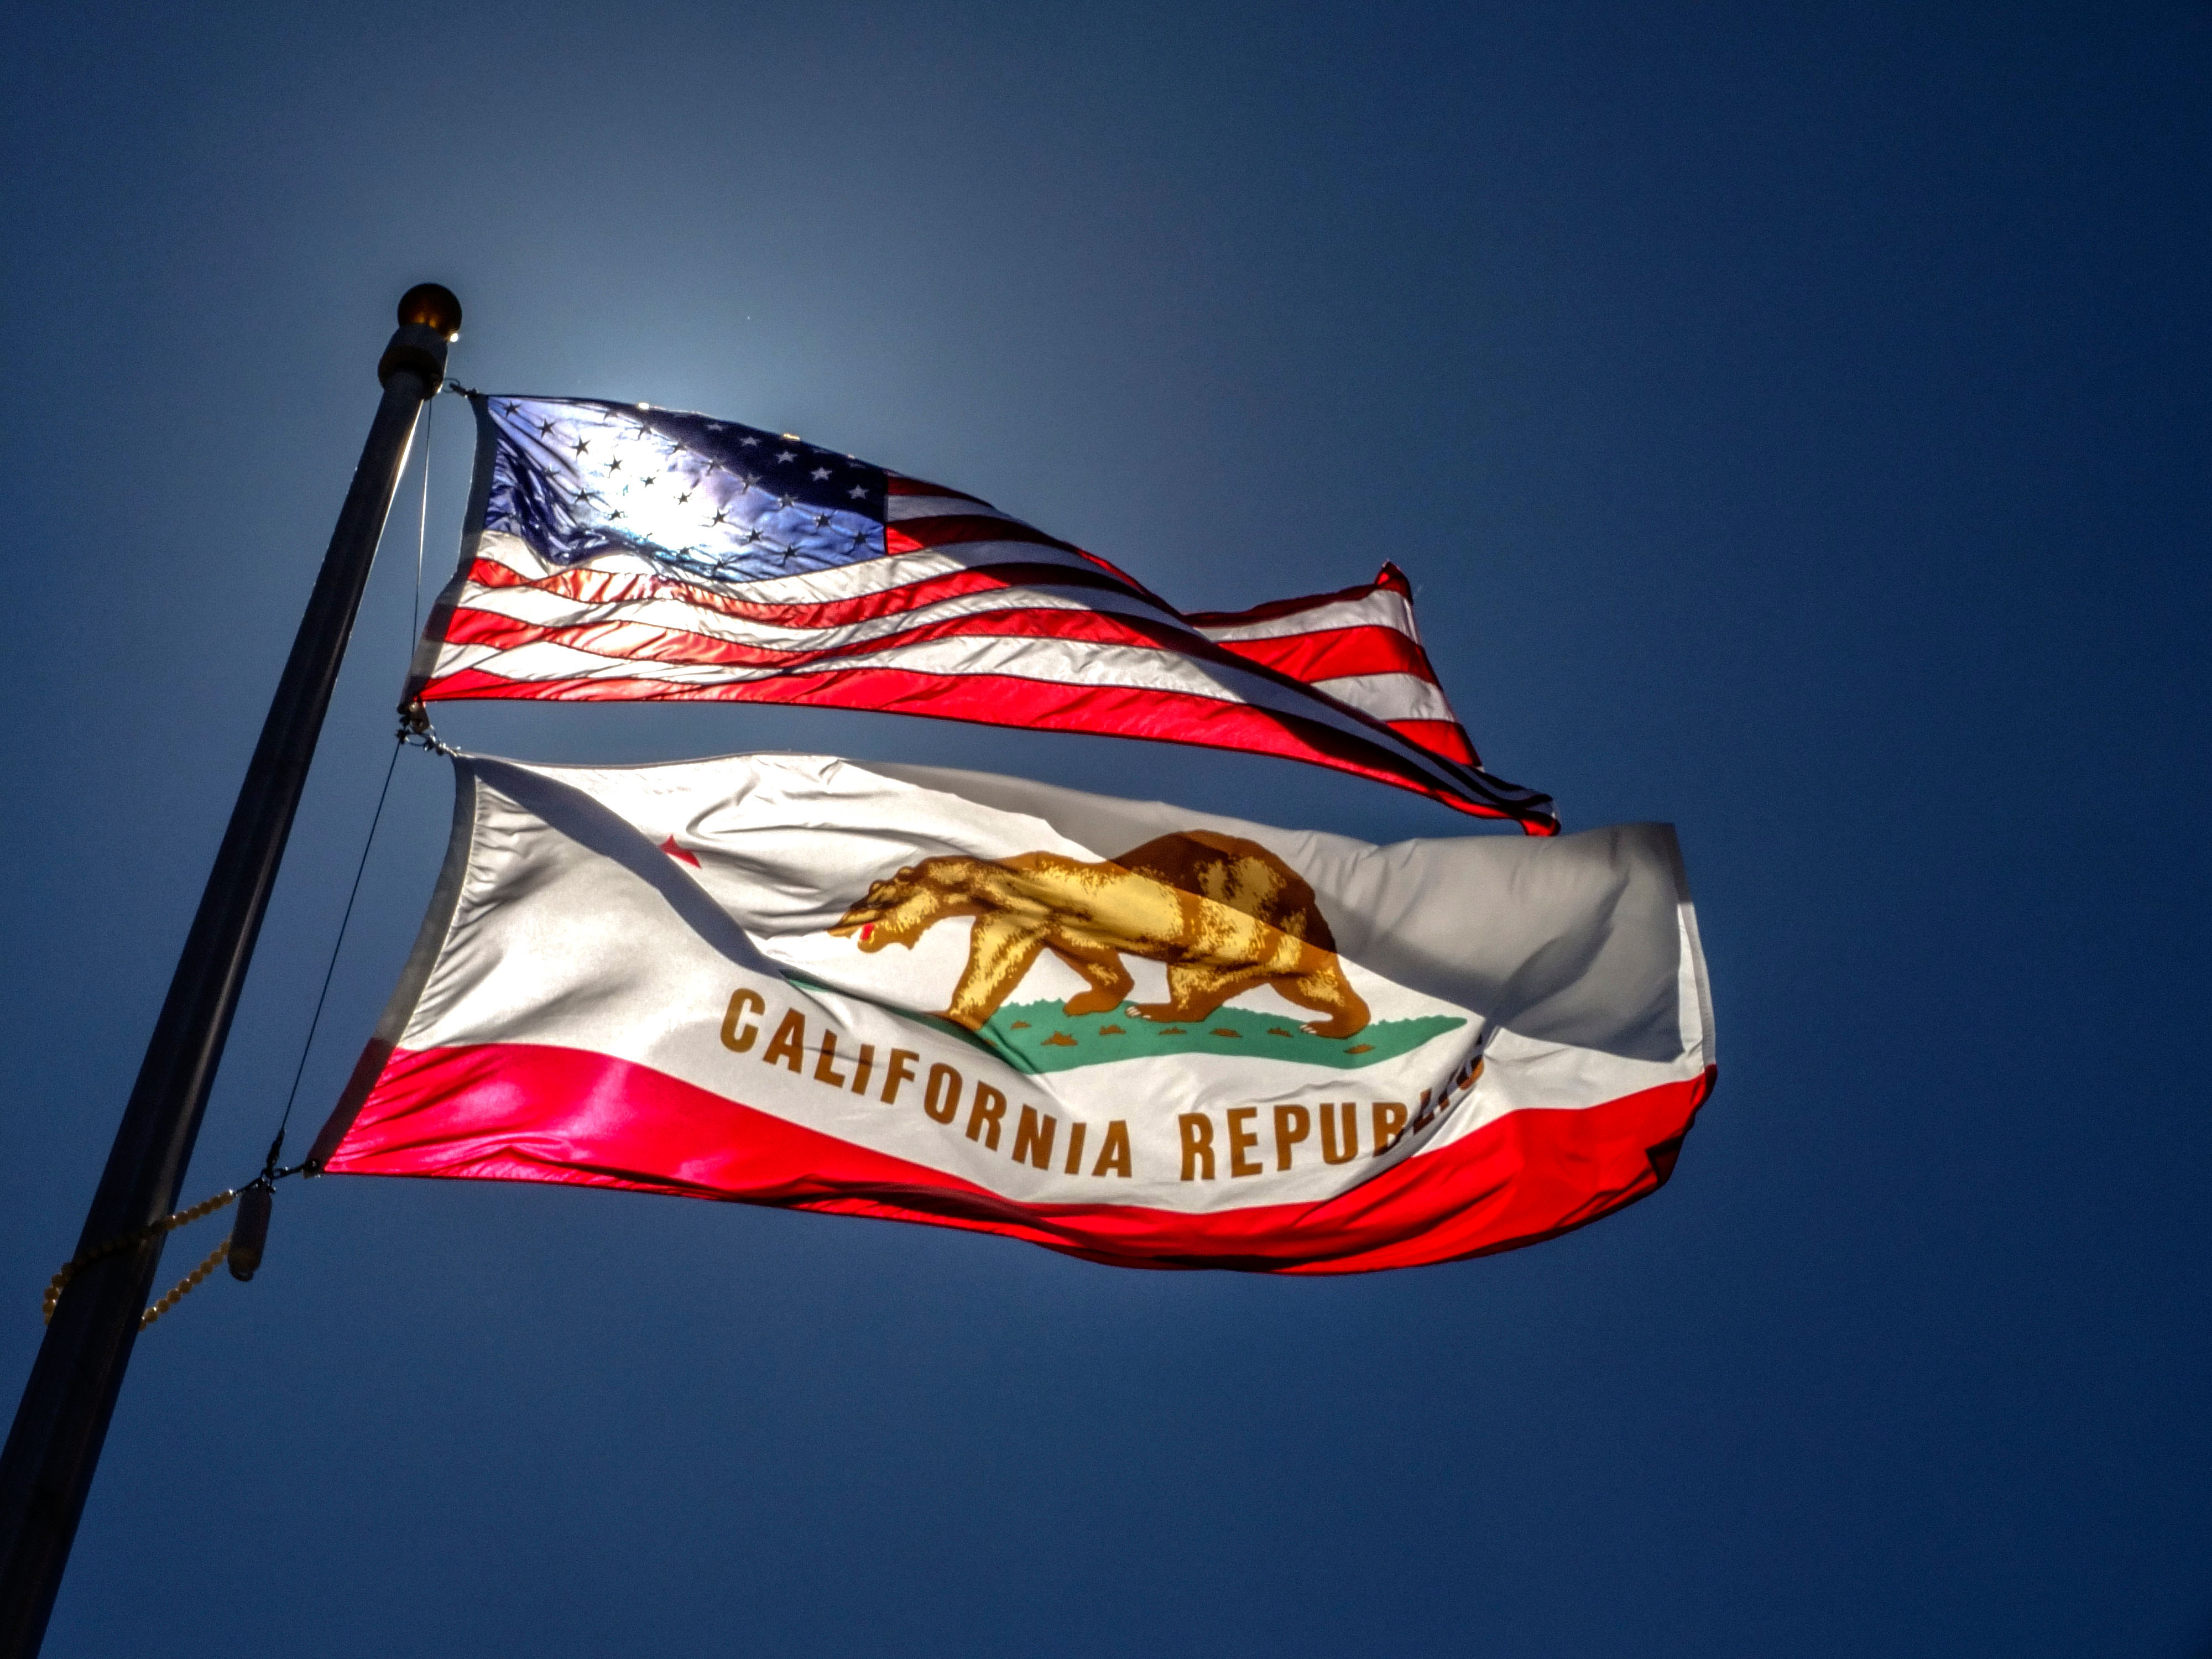 The American flag and California state flag.